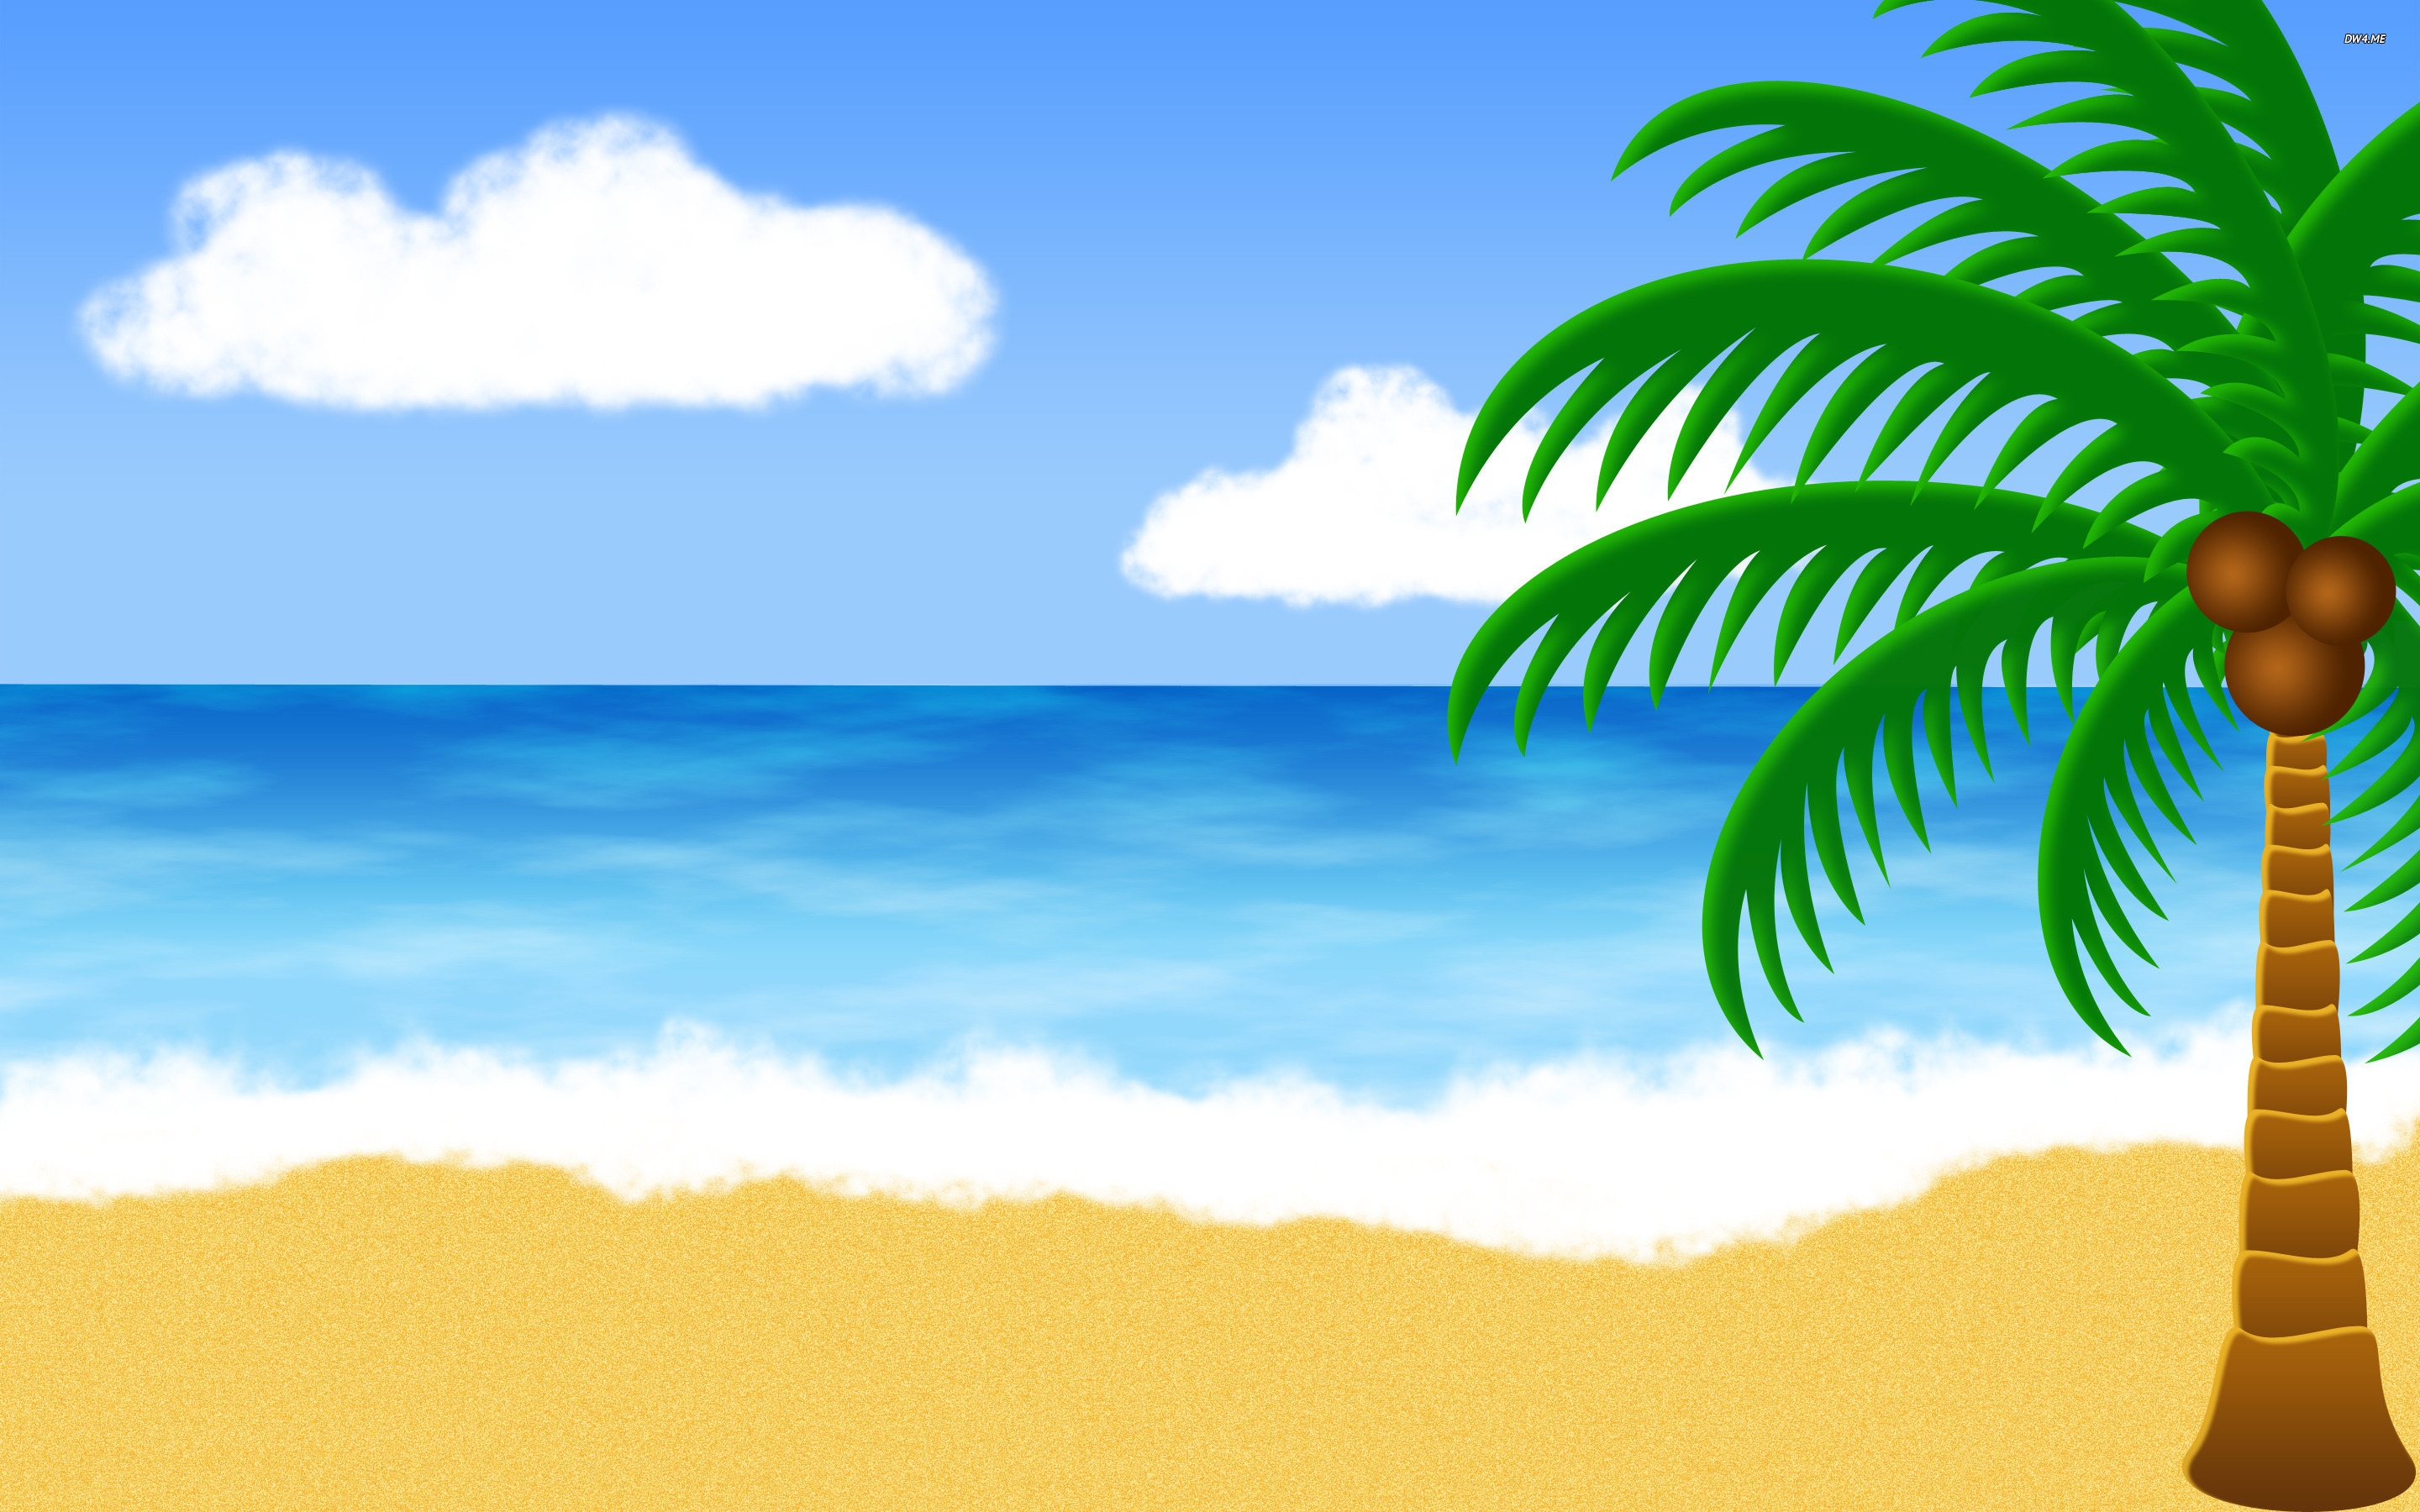 Animated clipart beach, Animated beach Transparent FREE for